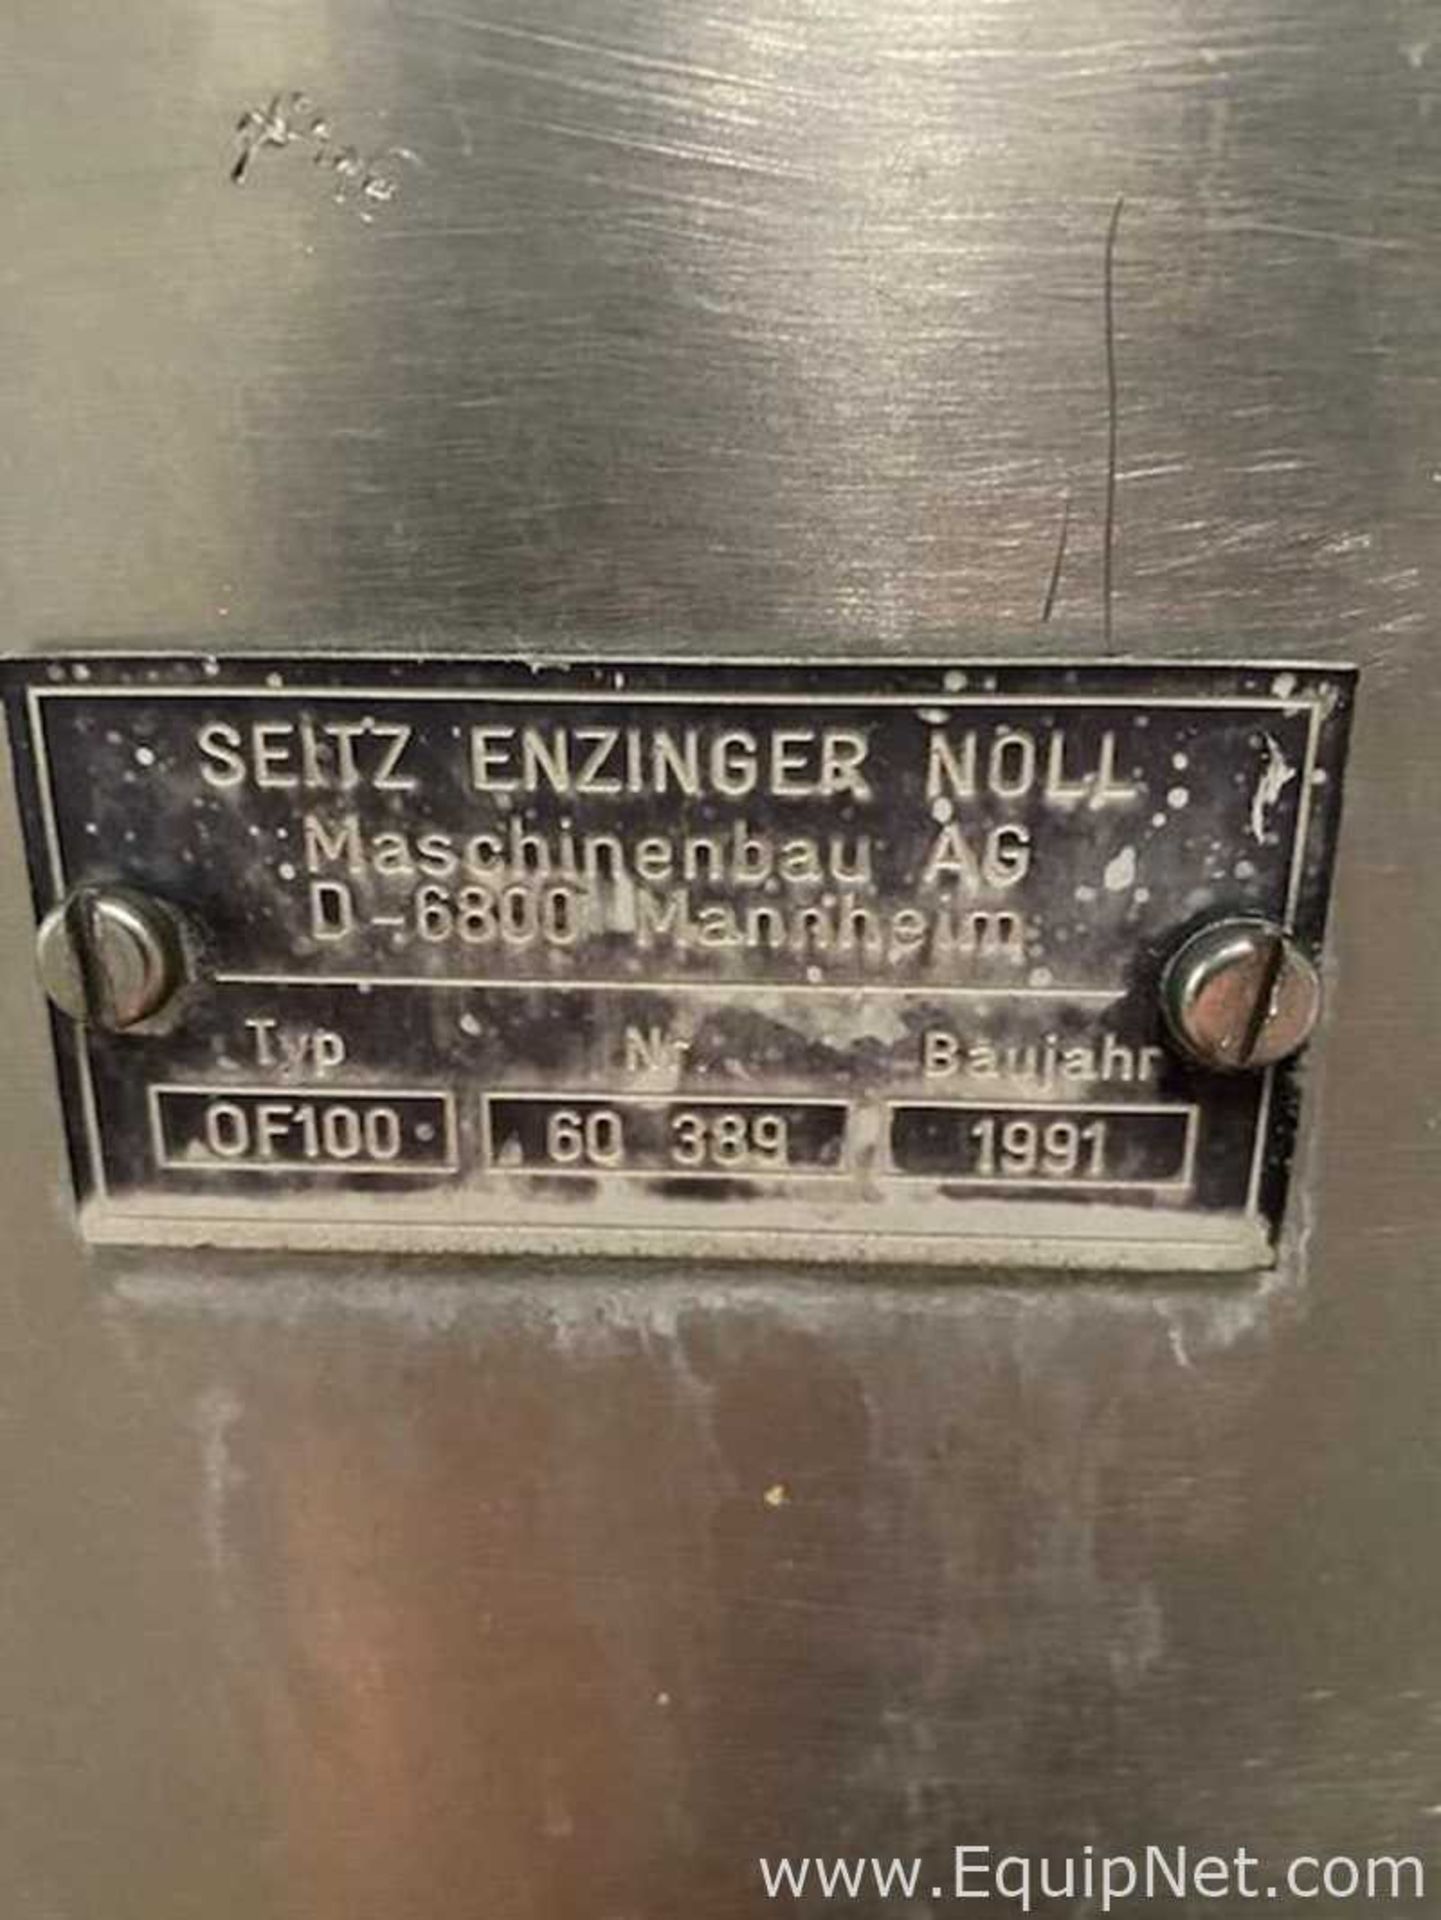 Seitz Enzinger Noll OF100 Filter Press From Micro Brewery Service - Image 4 of 6